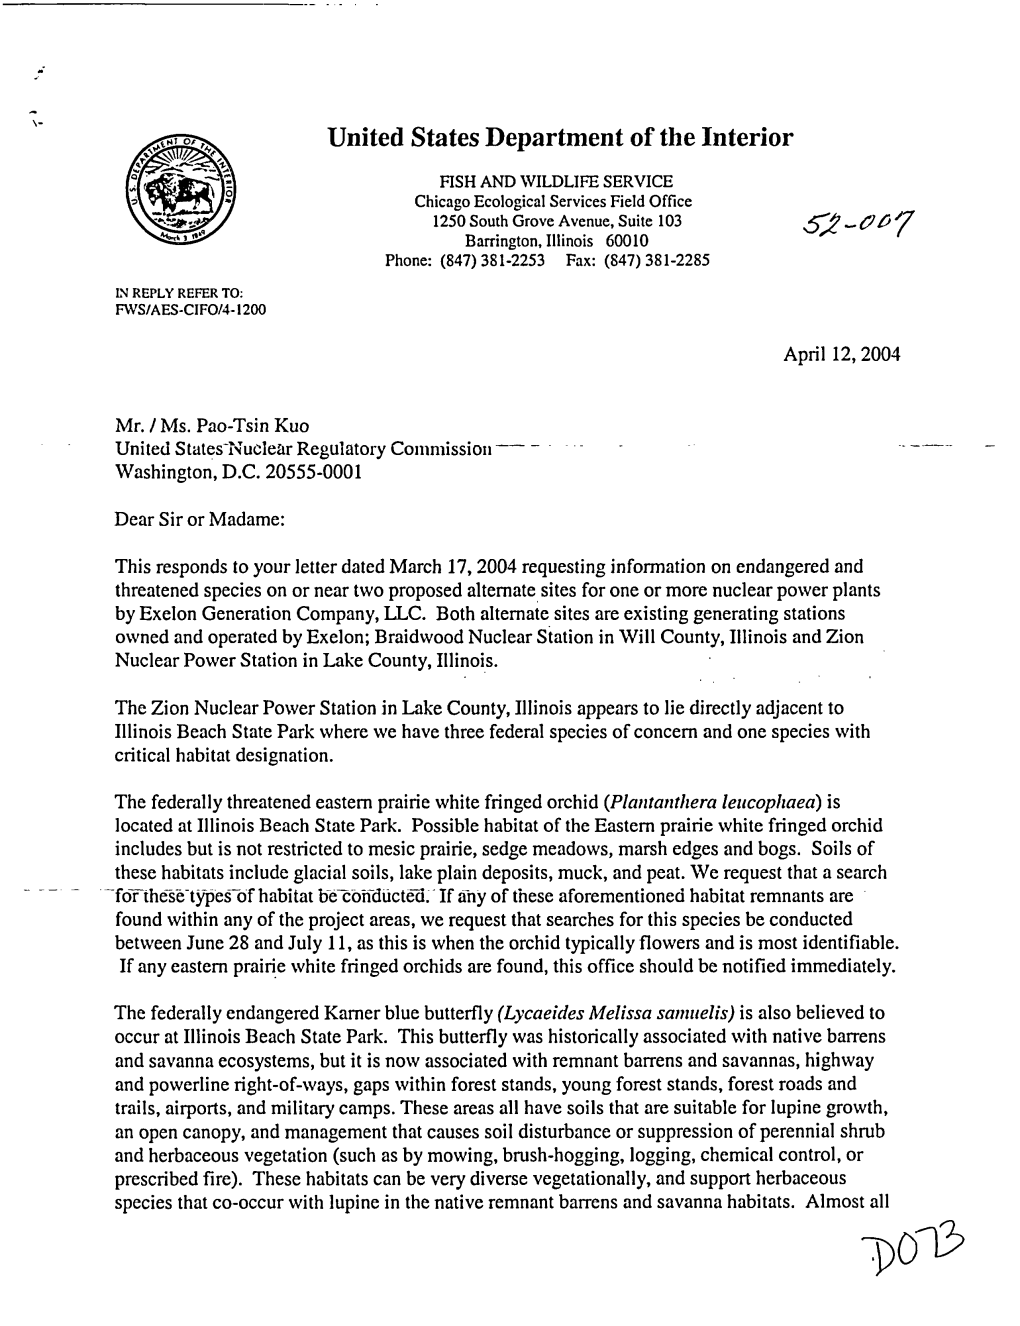 2004/04/12-Response to Letter Dated March 17, 2004 Requesting